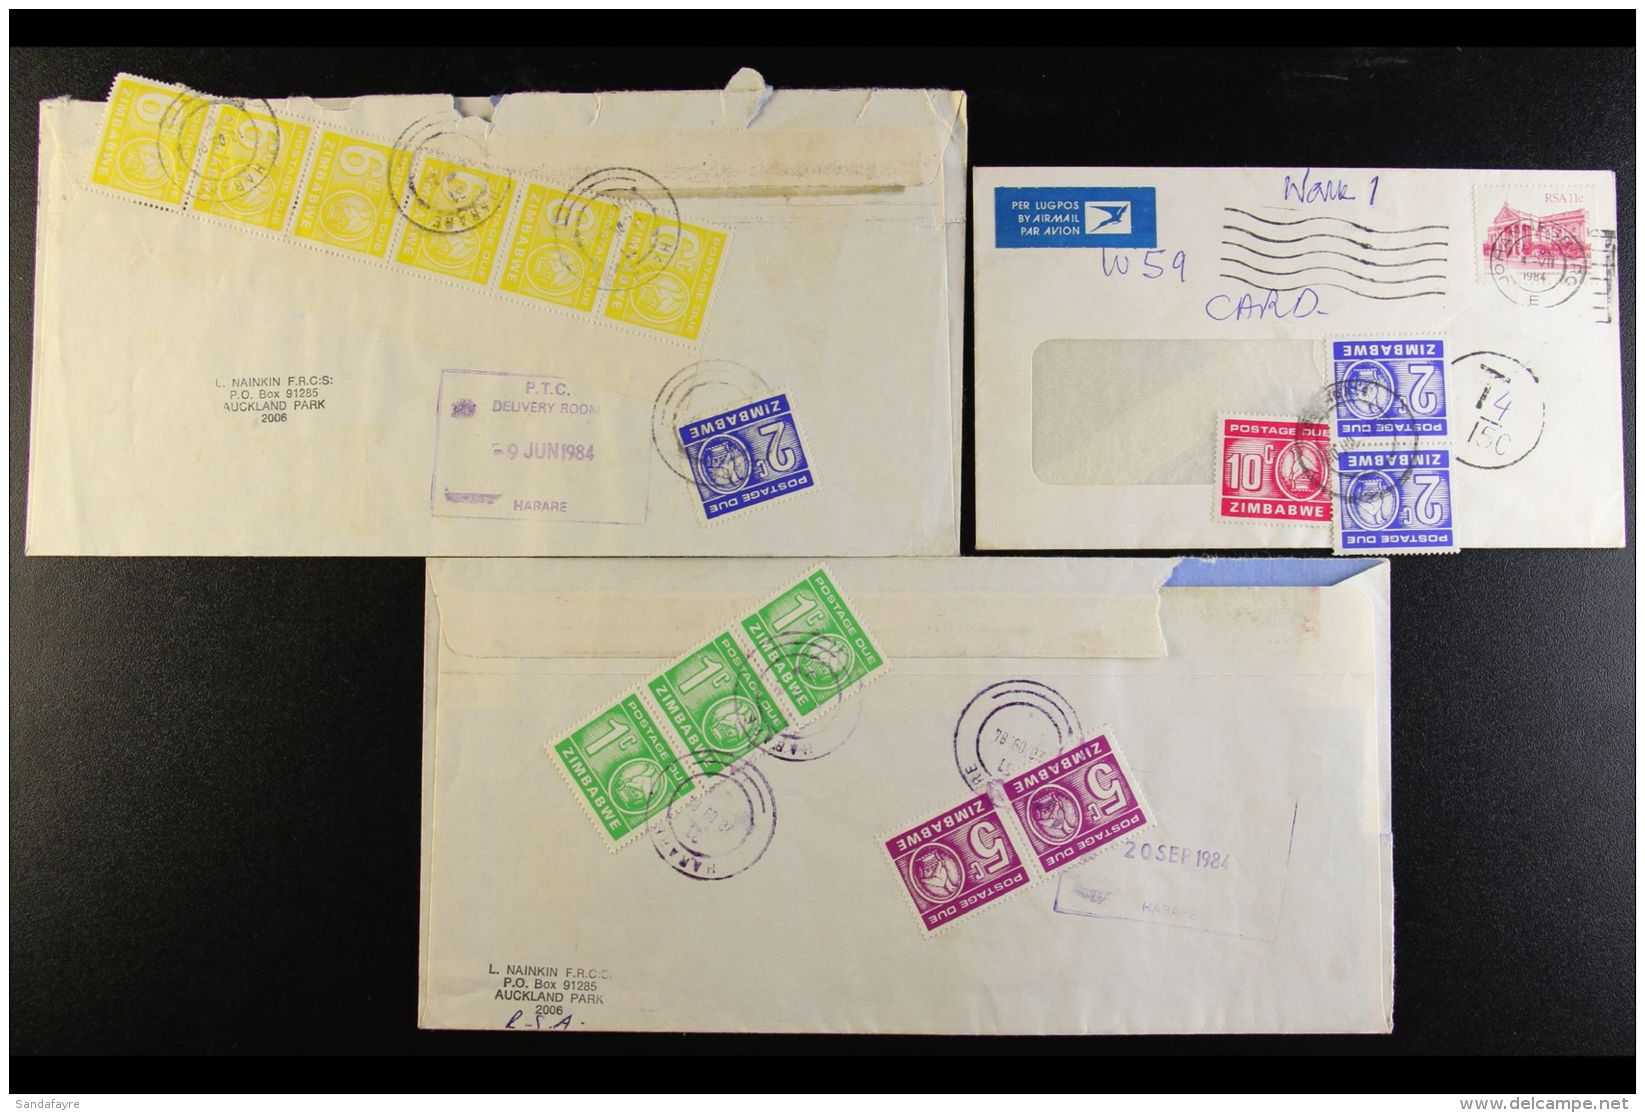 POSTAGE DUE COVERS Group Of Three 1984 Incoming Covers From South Africa, Each Underpaid And Taxed Accordingly,... - Zimbabwe (1980-...)